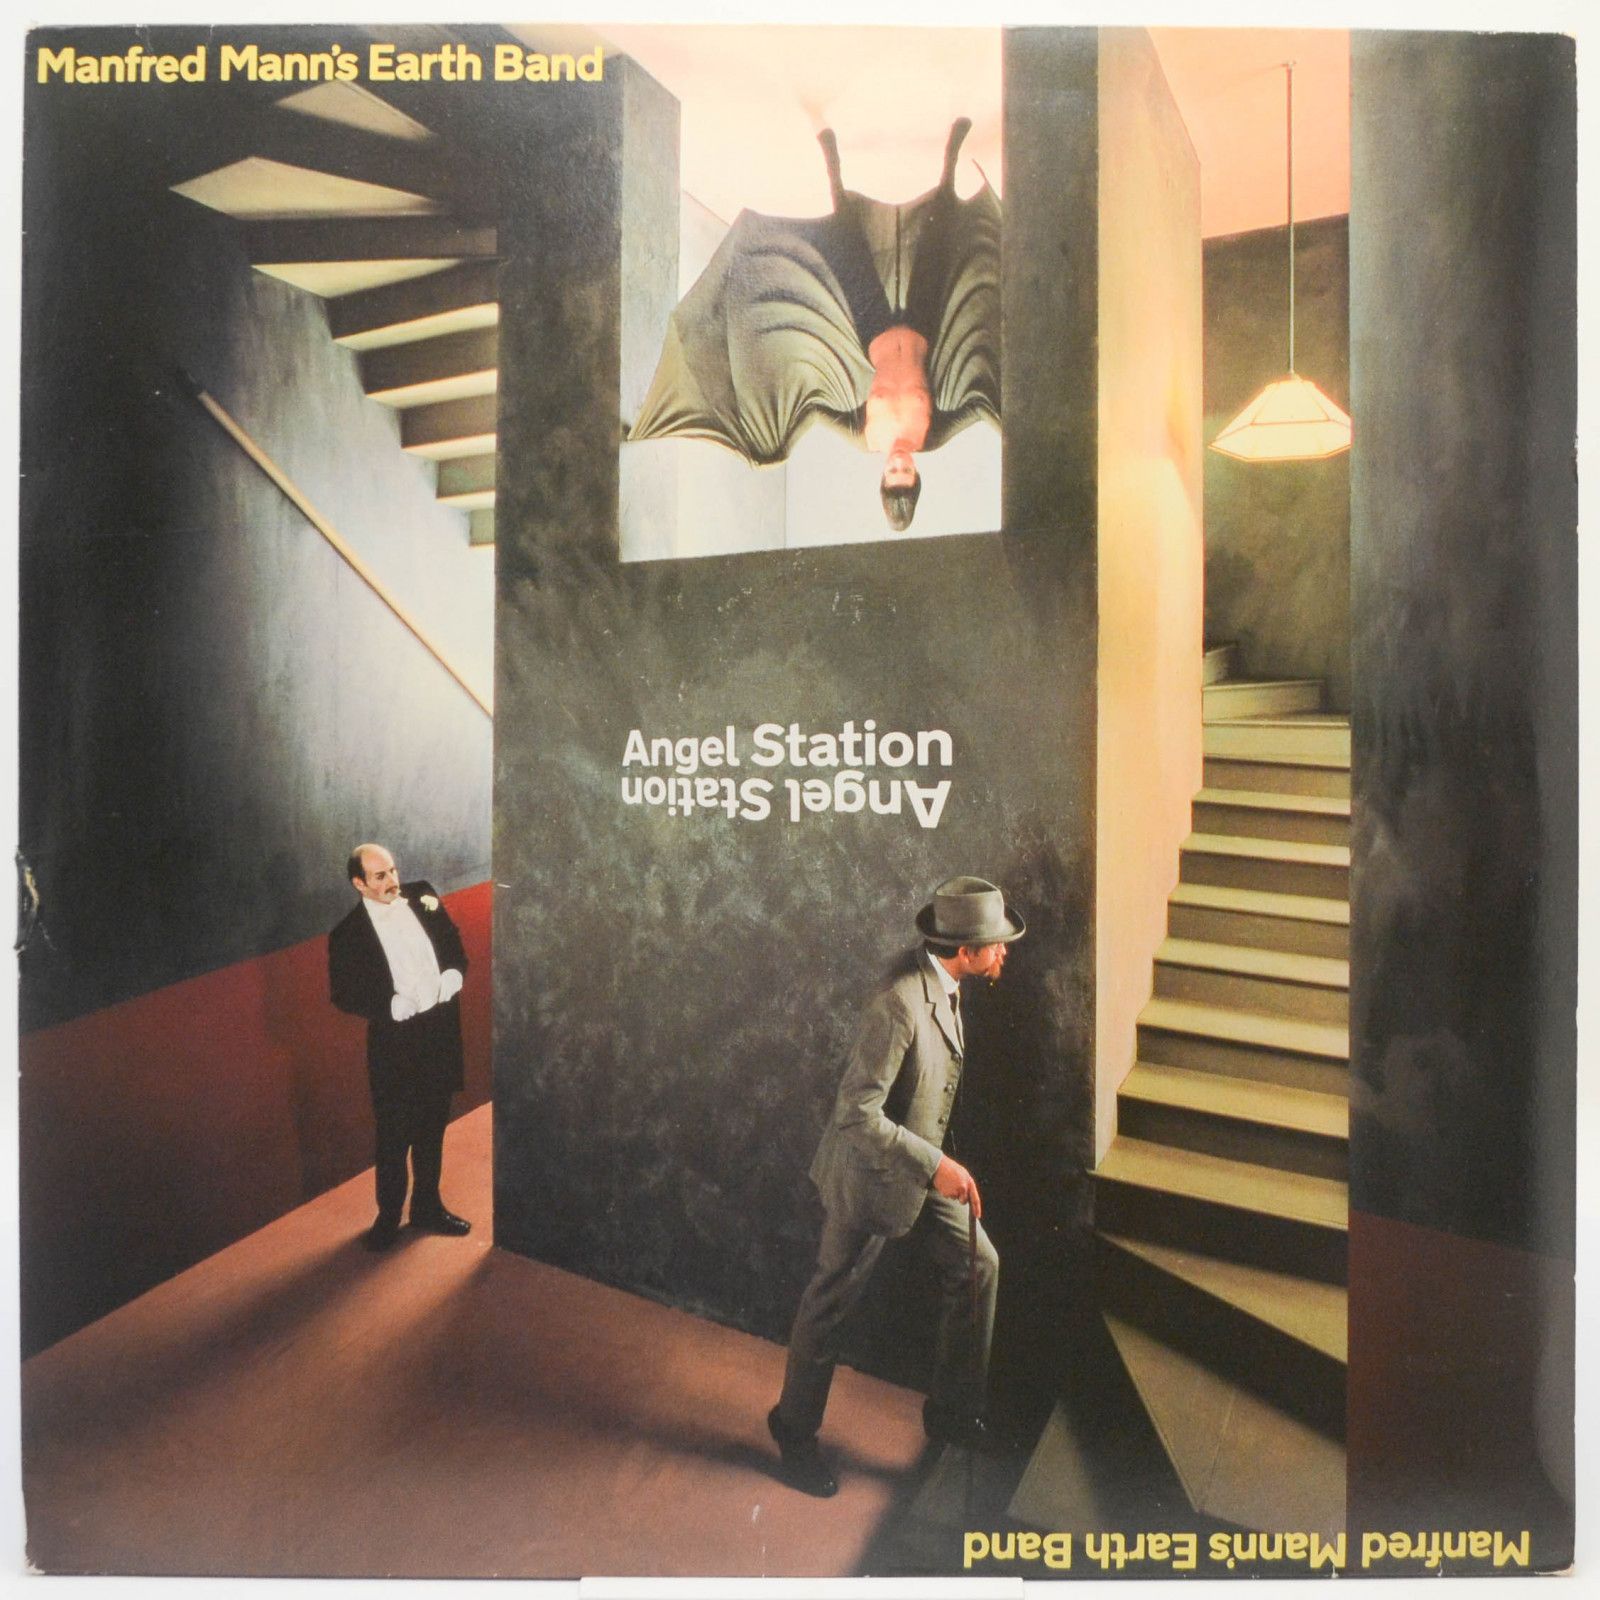 Manfred Mann's Earth Band — Angel Station (poster), 1979